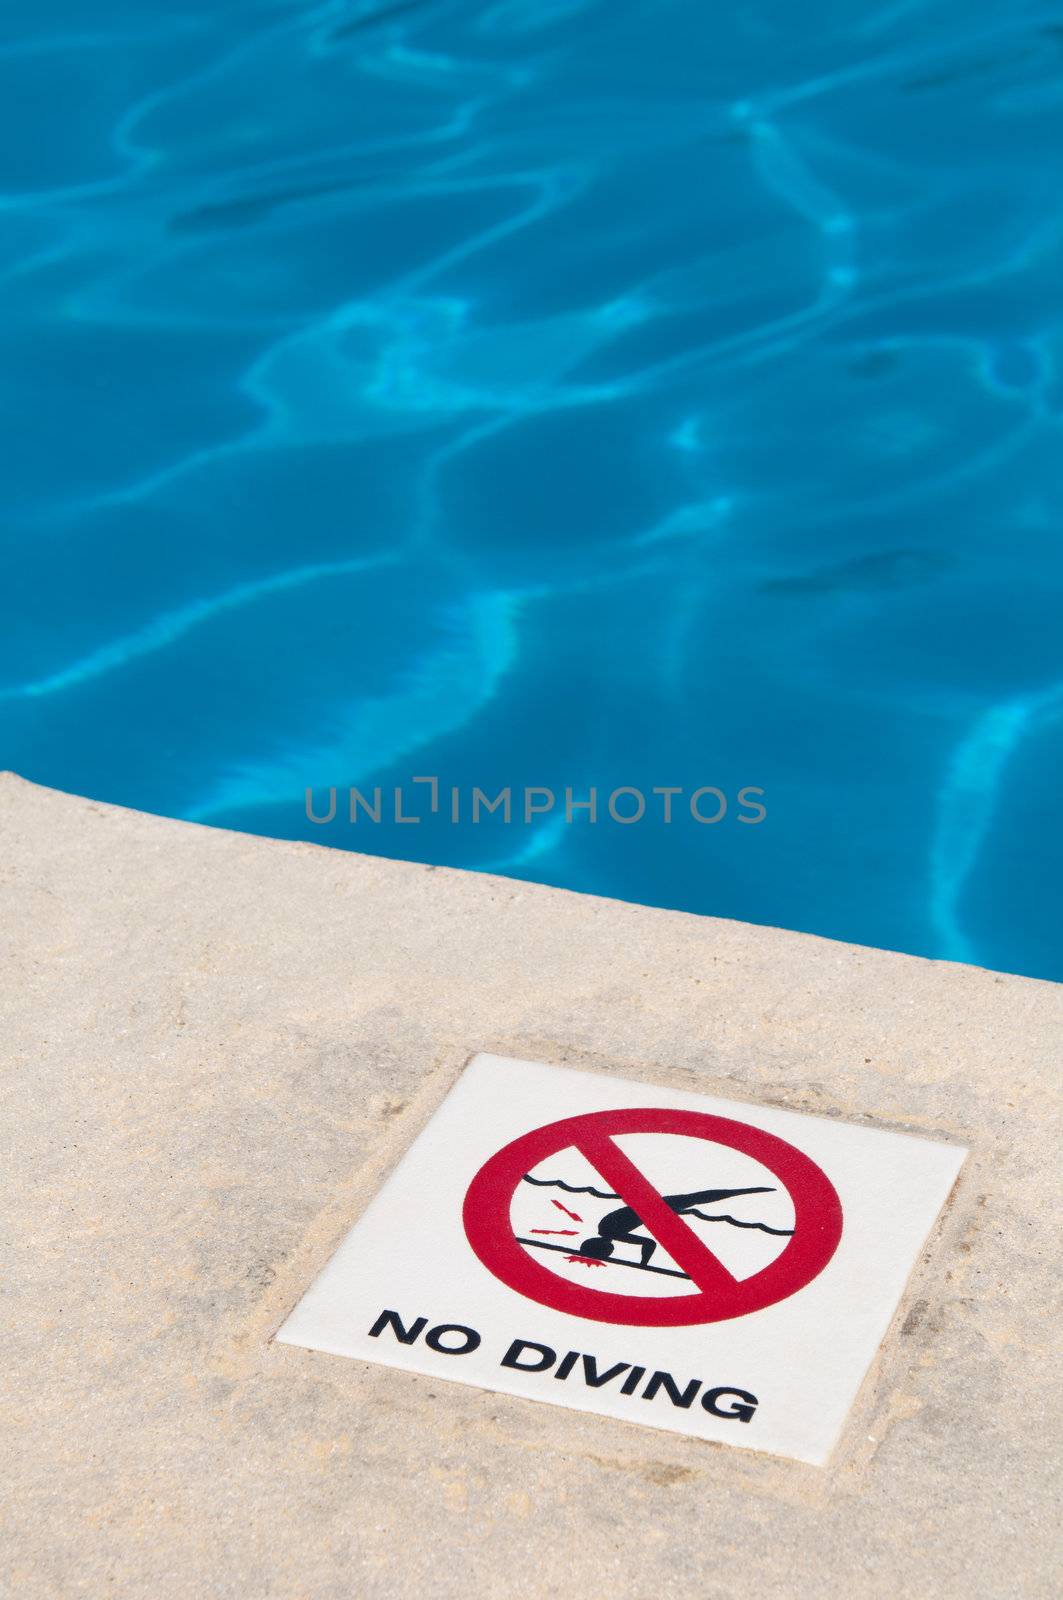 No diving sign by luissantos84